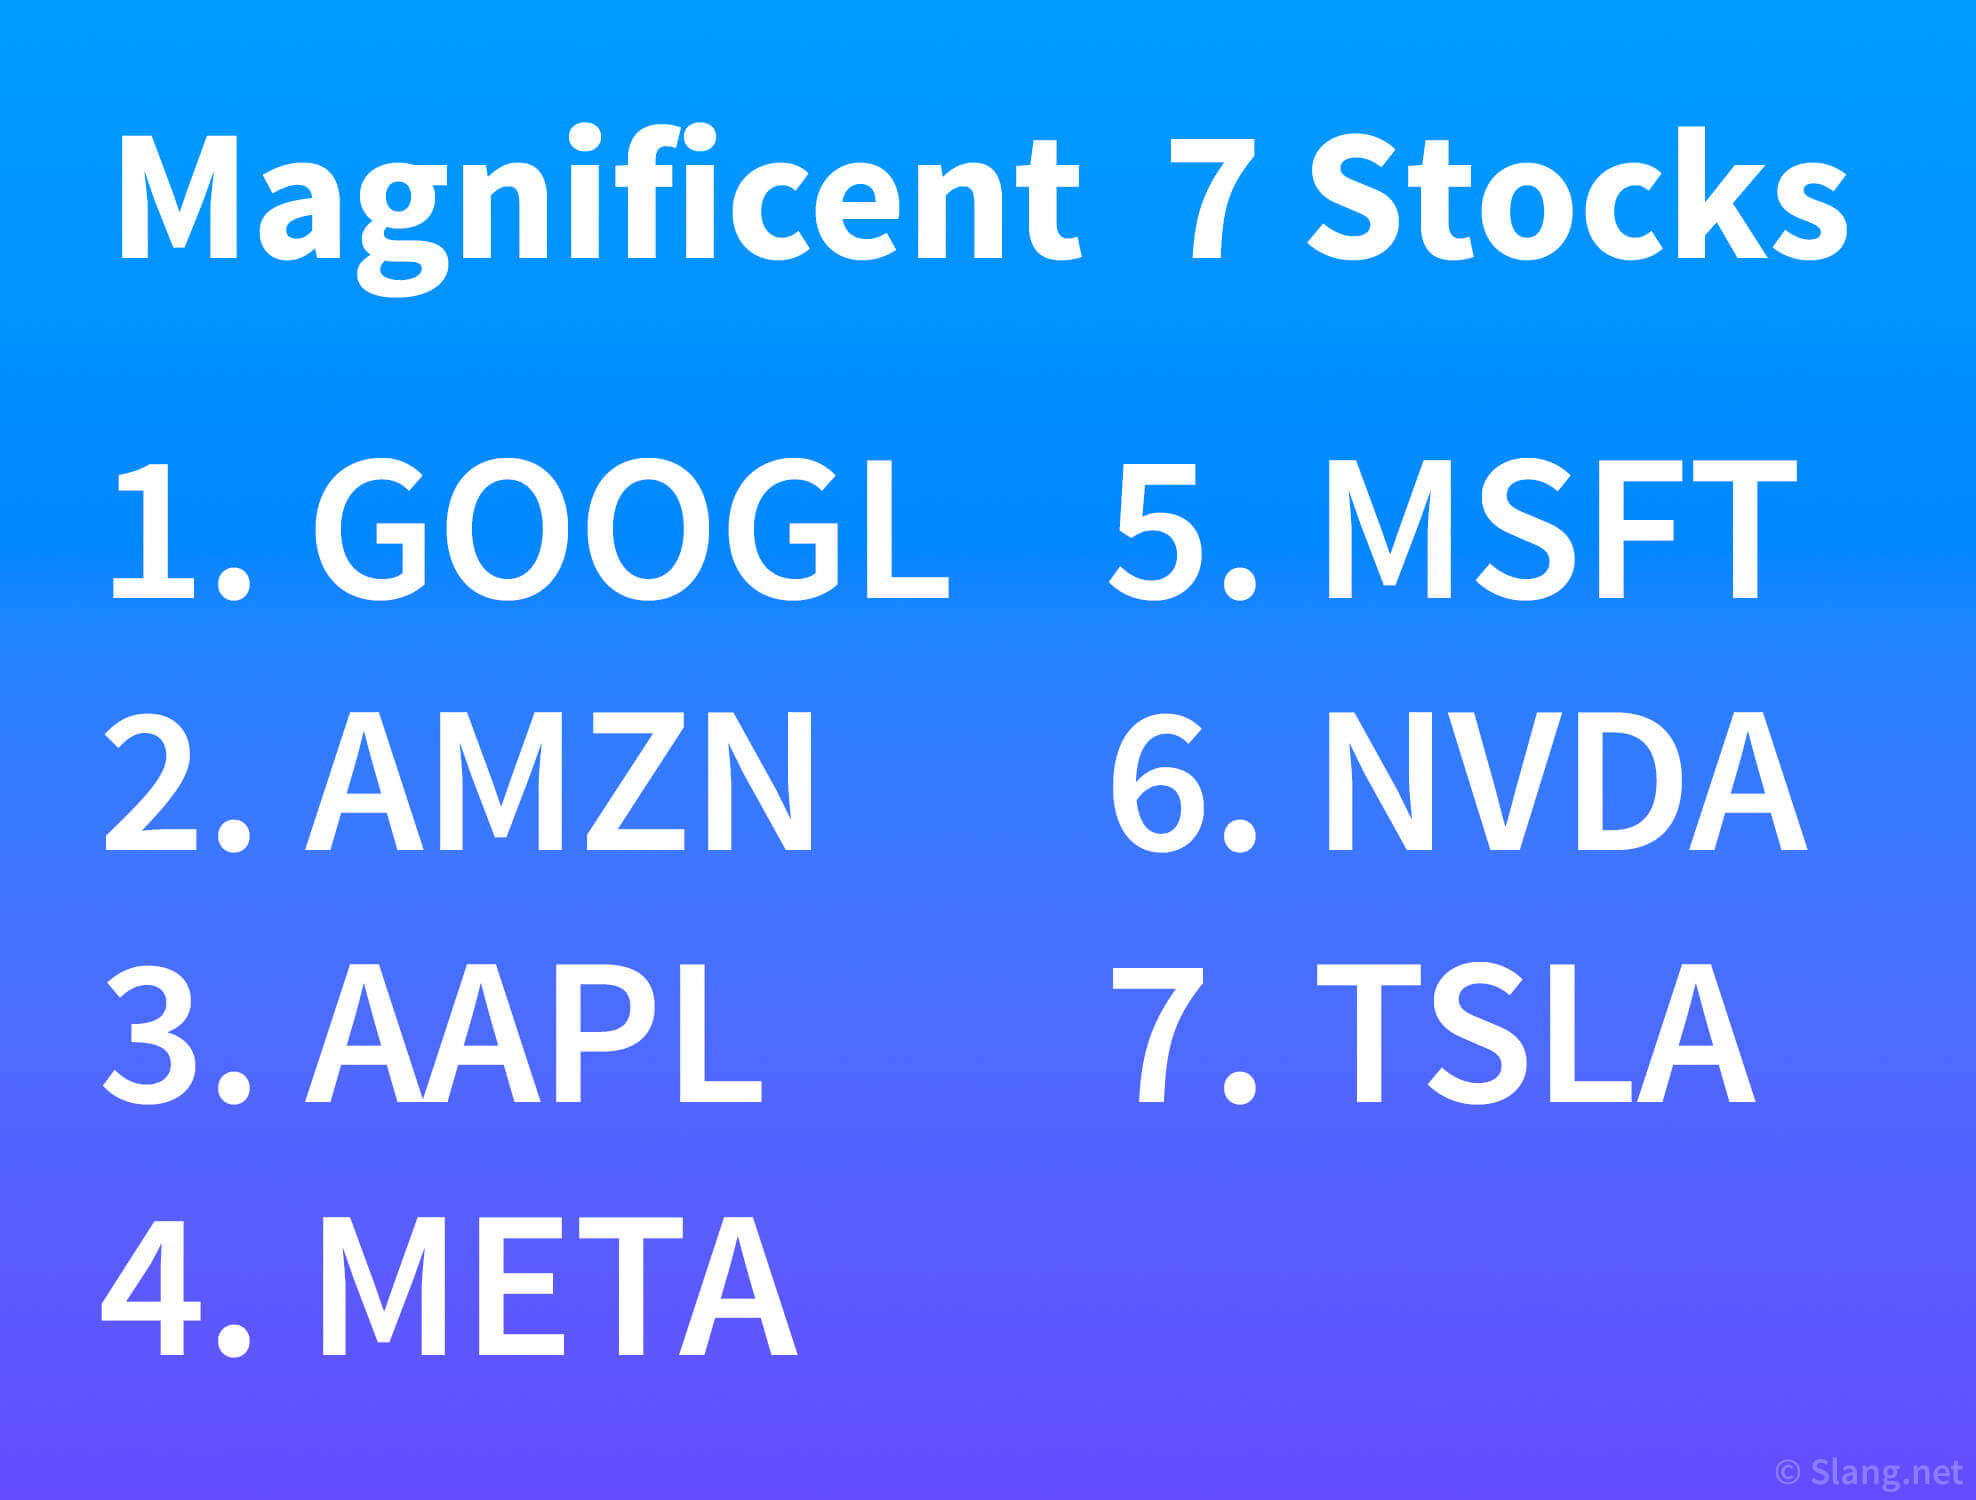 The Mag 7 stocks